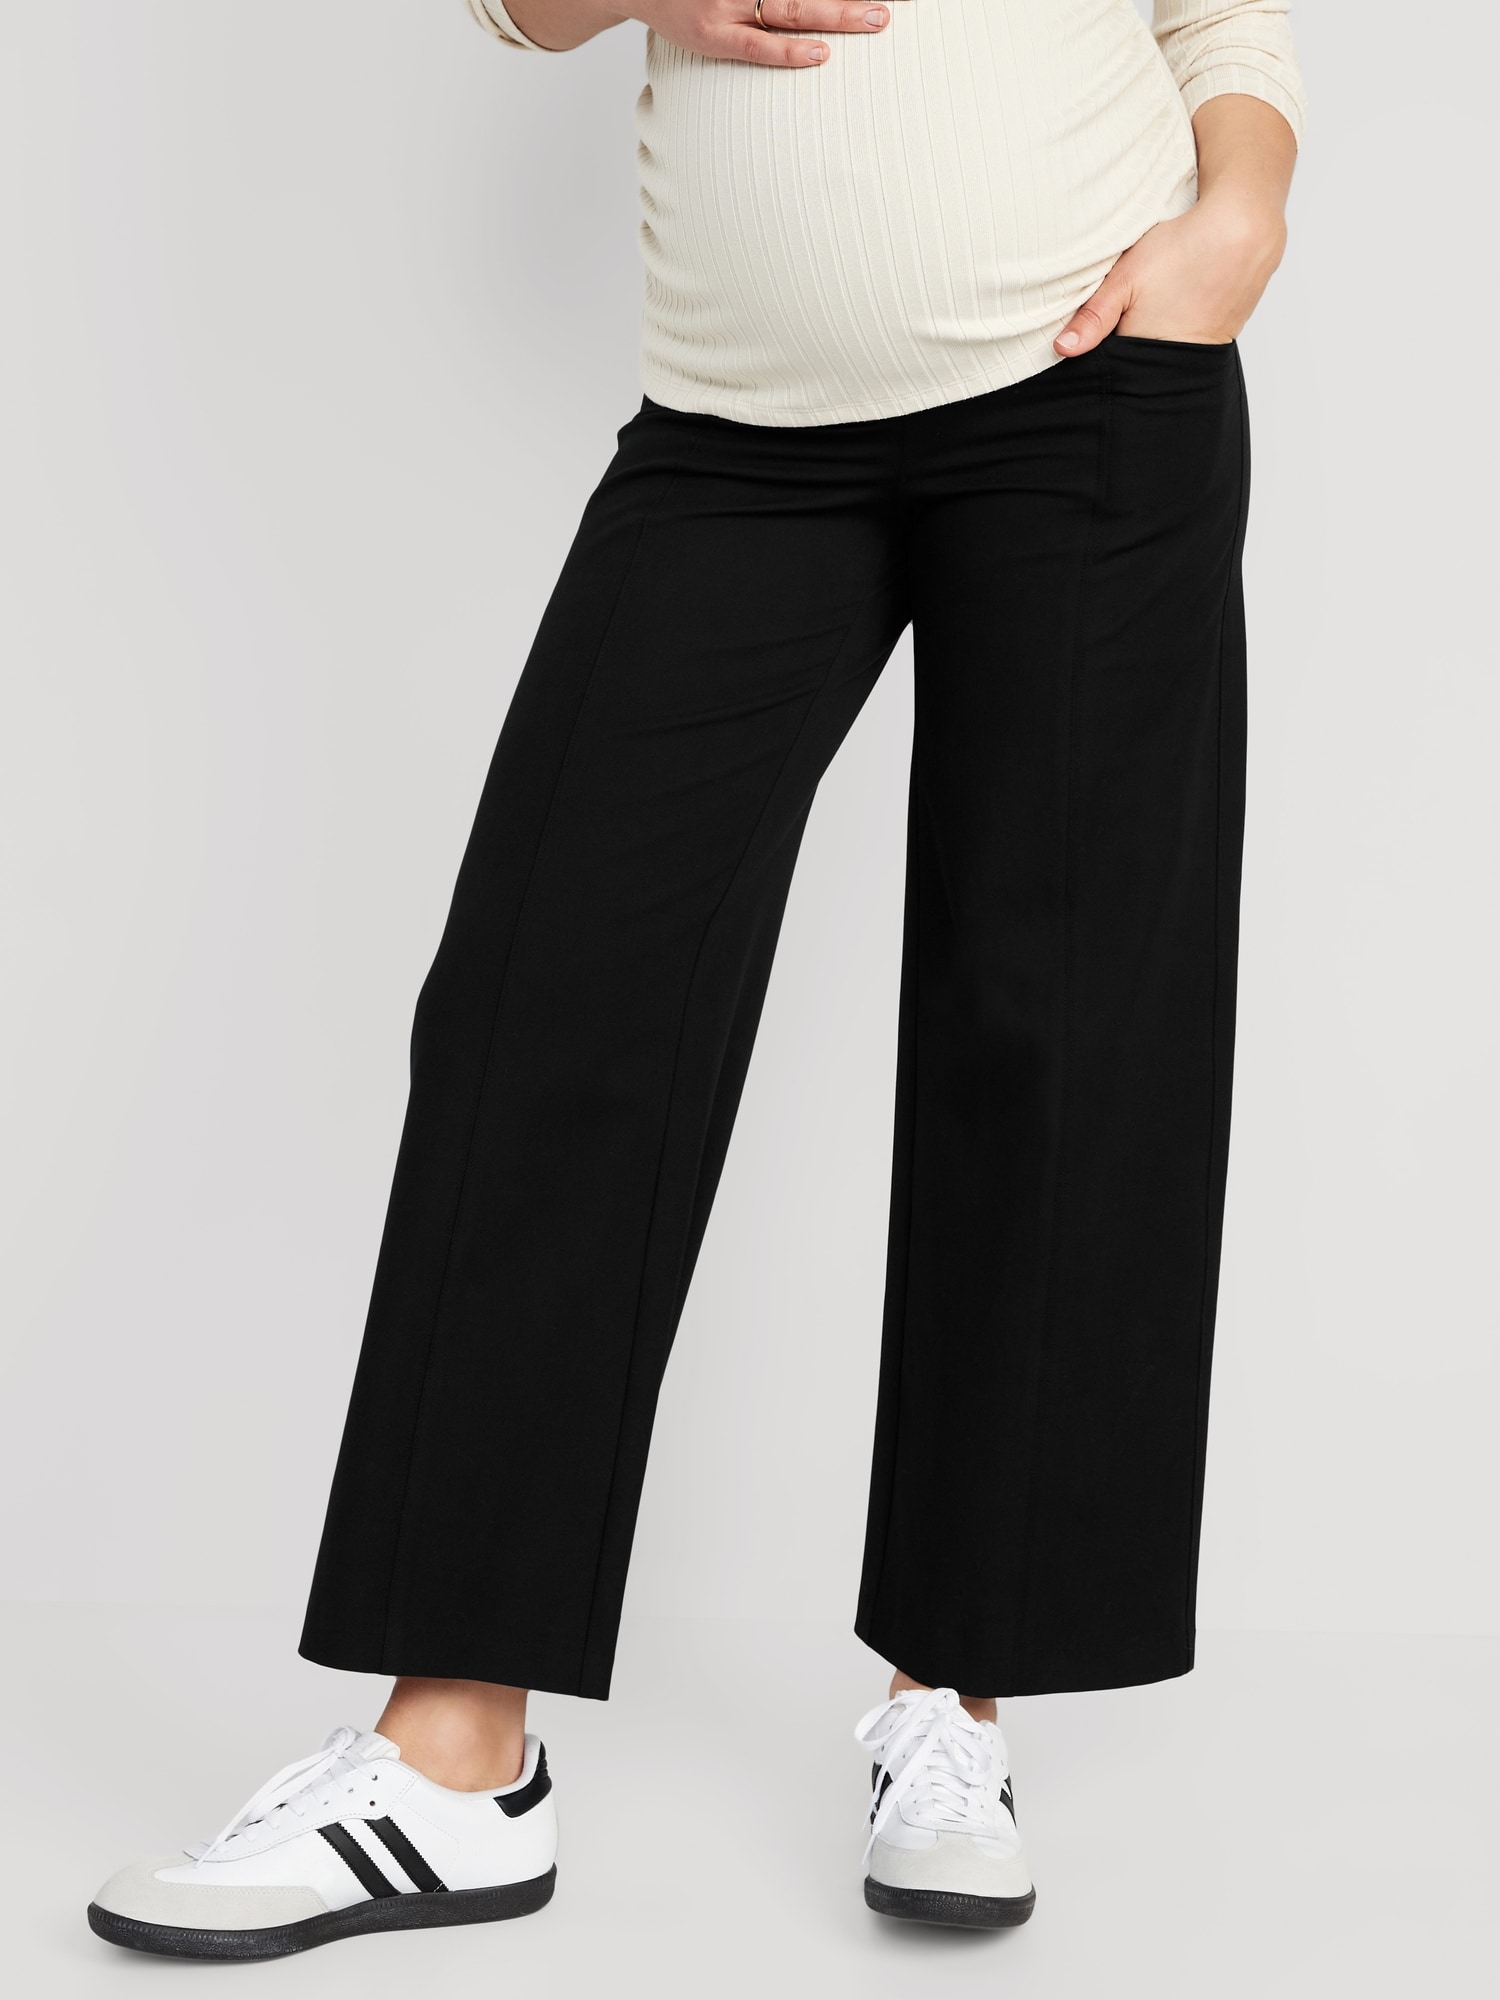 Tall Maternity Jeans